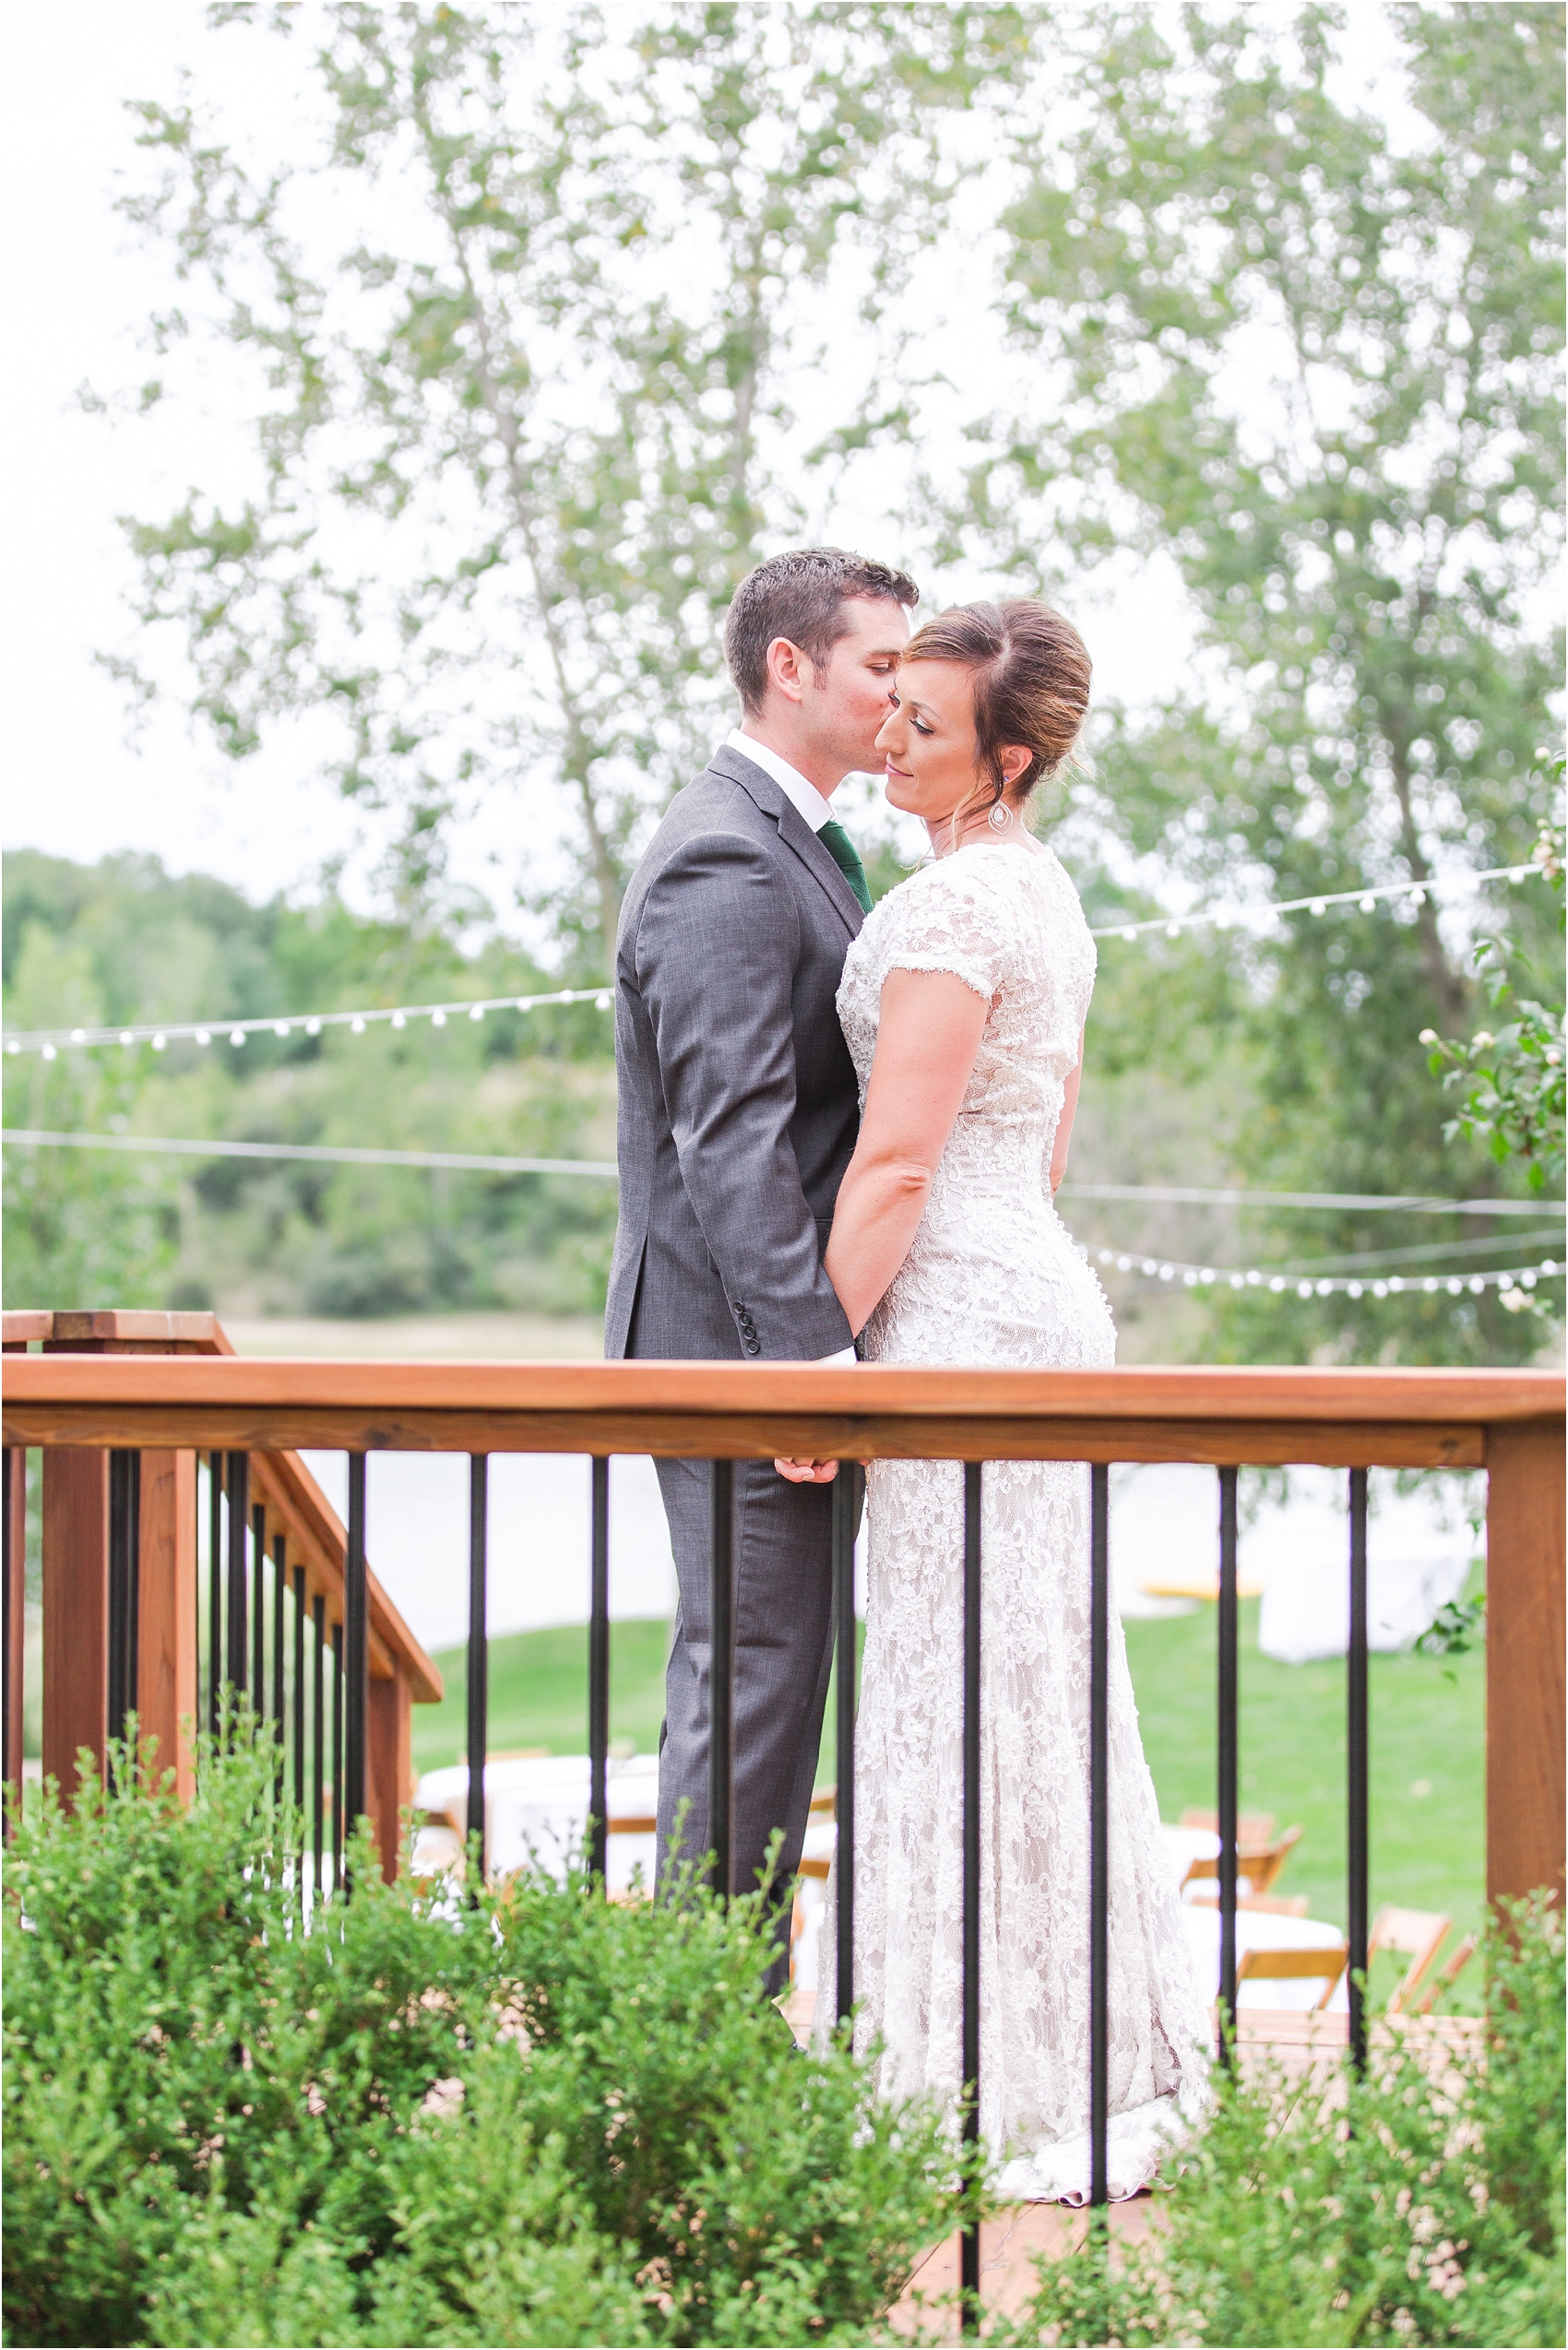 romantic-intimate-backyard-wedding-photos-at-private-estate-in-ann-arbor-mi-by-courtney-carolyn-photography_0032.jpg